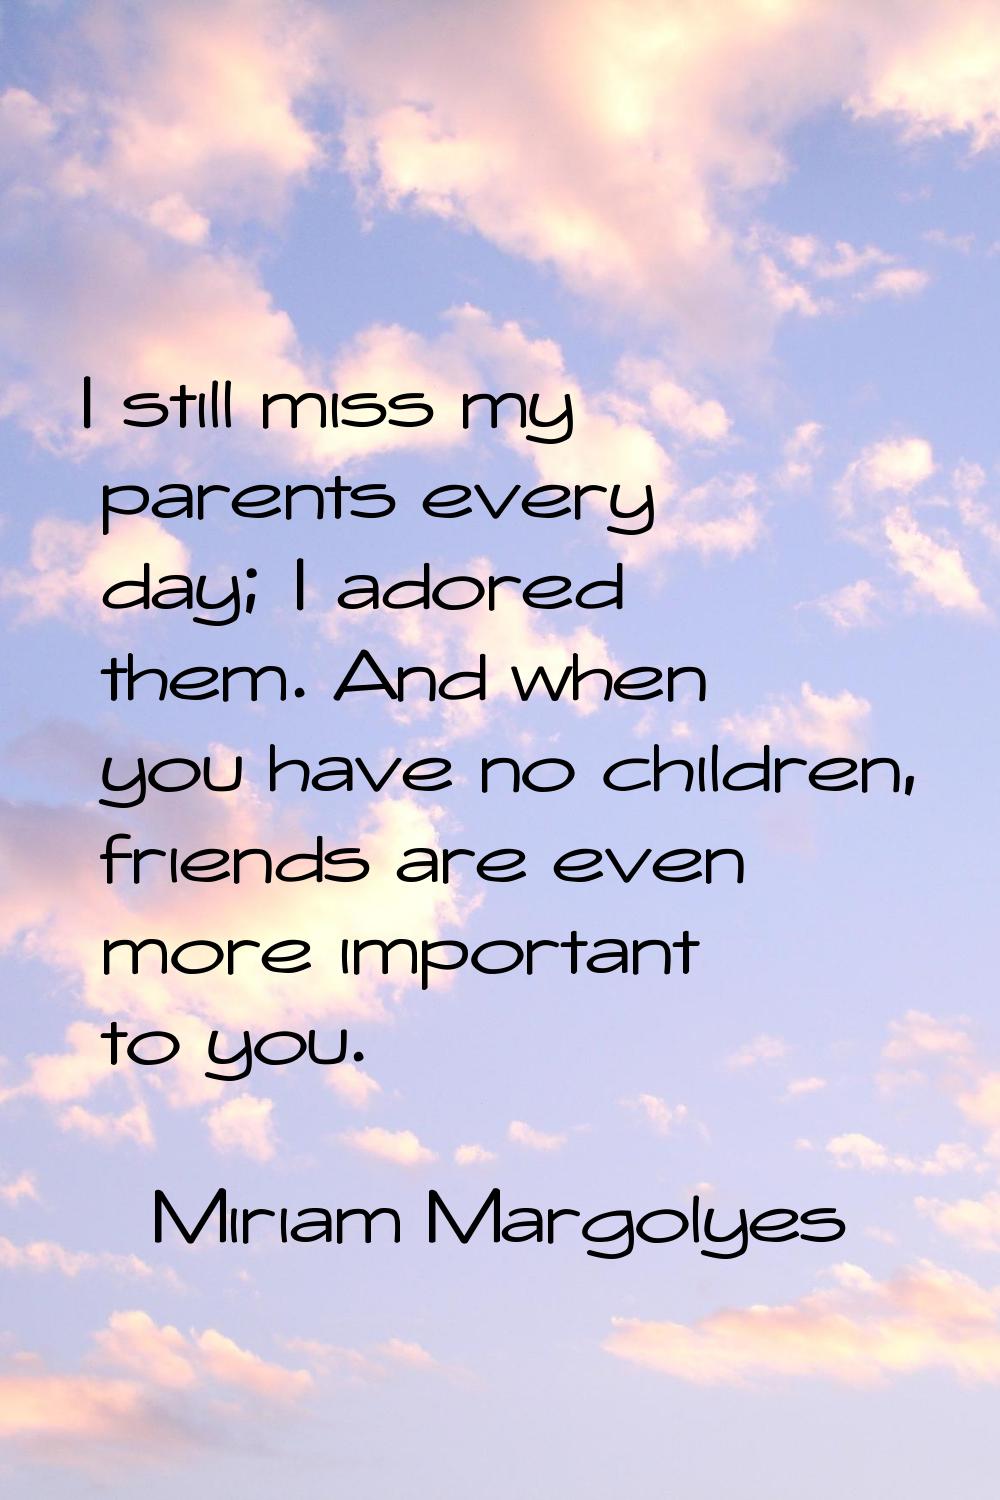 I still miss my parents every day; I adored them. And when you have no children, friends are even m